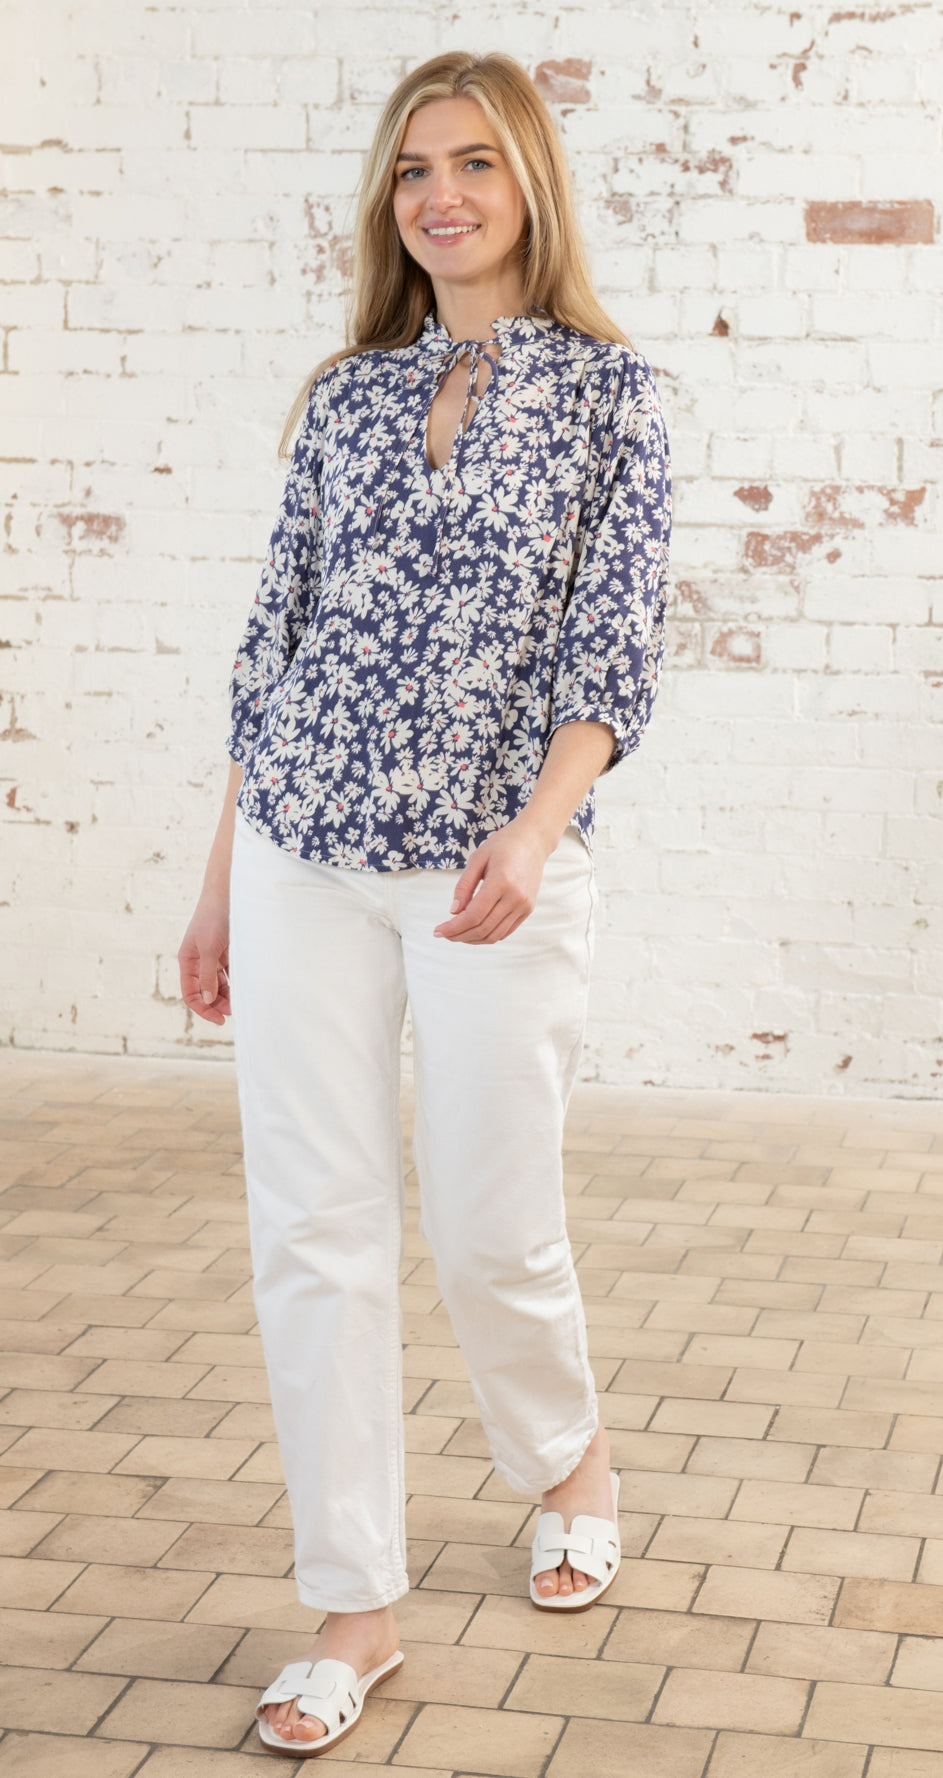 Lighthouse Lola women's blouse in indigo with a daisy floral print.